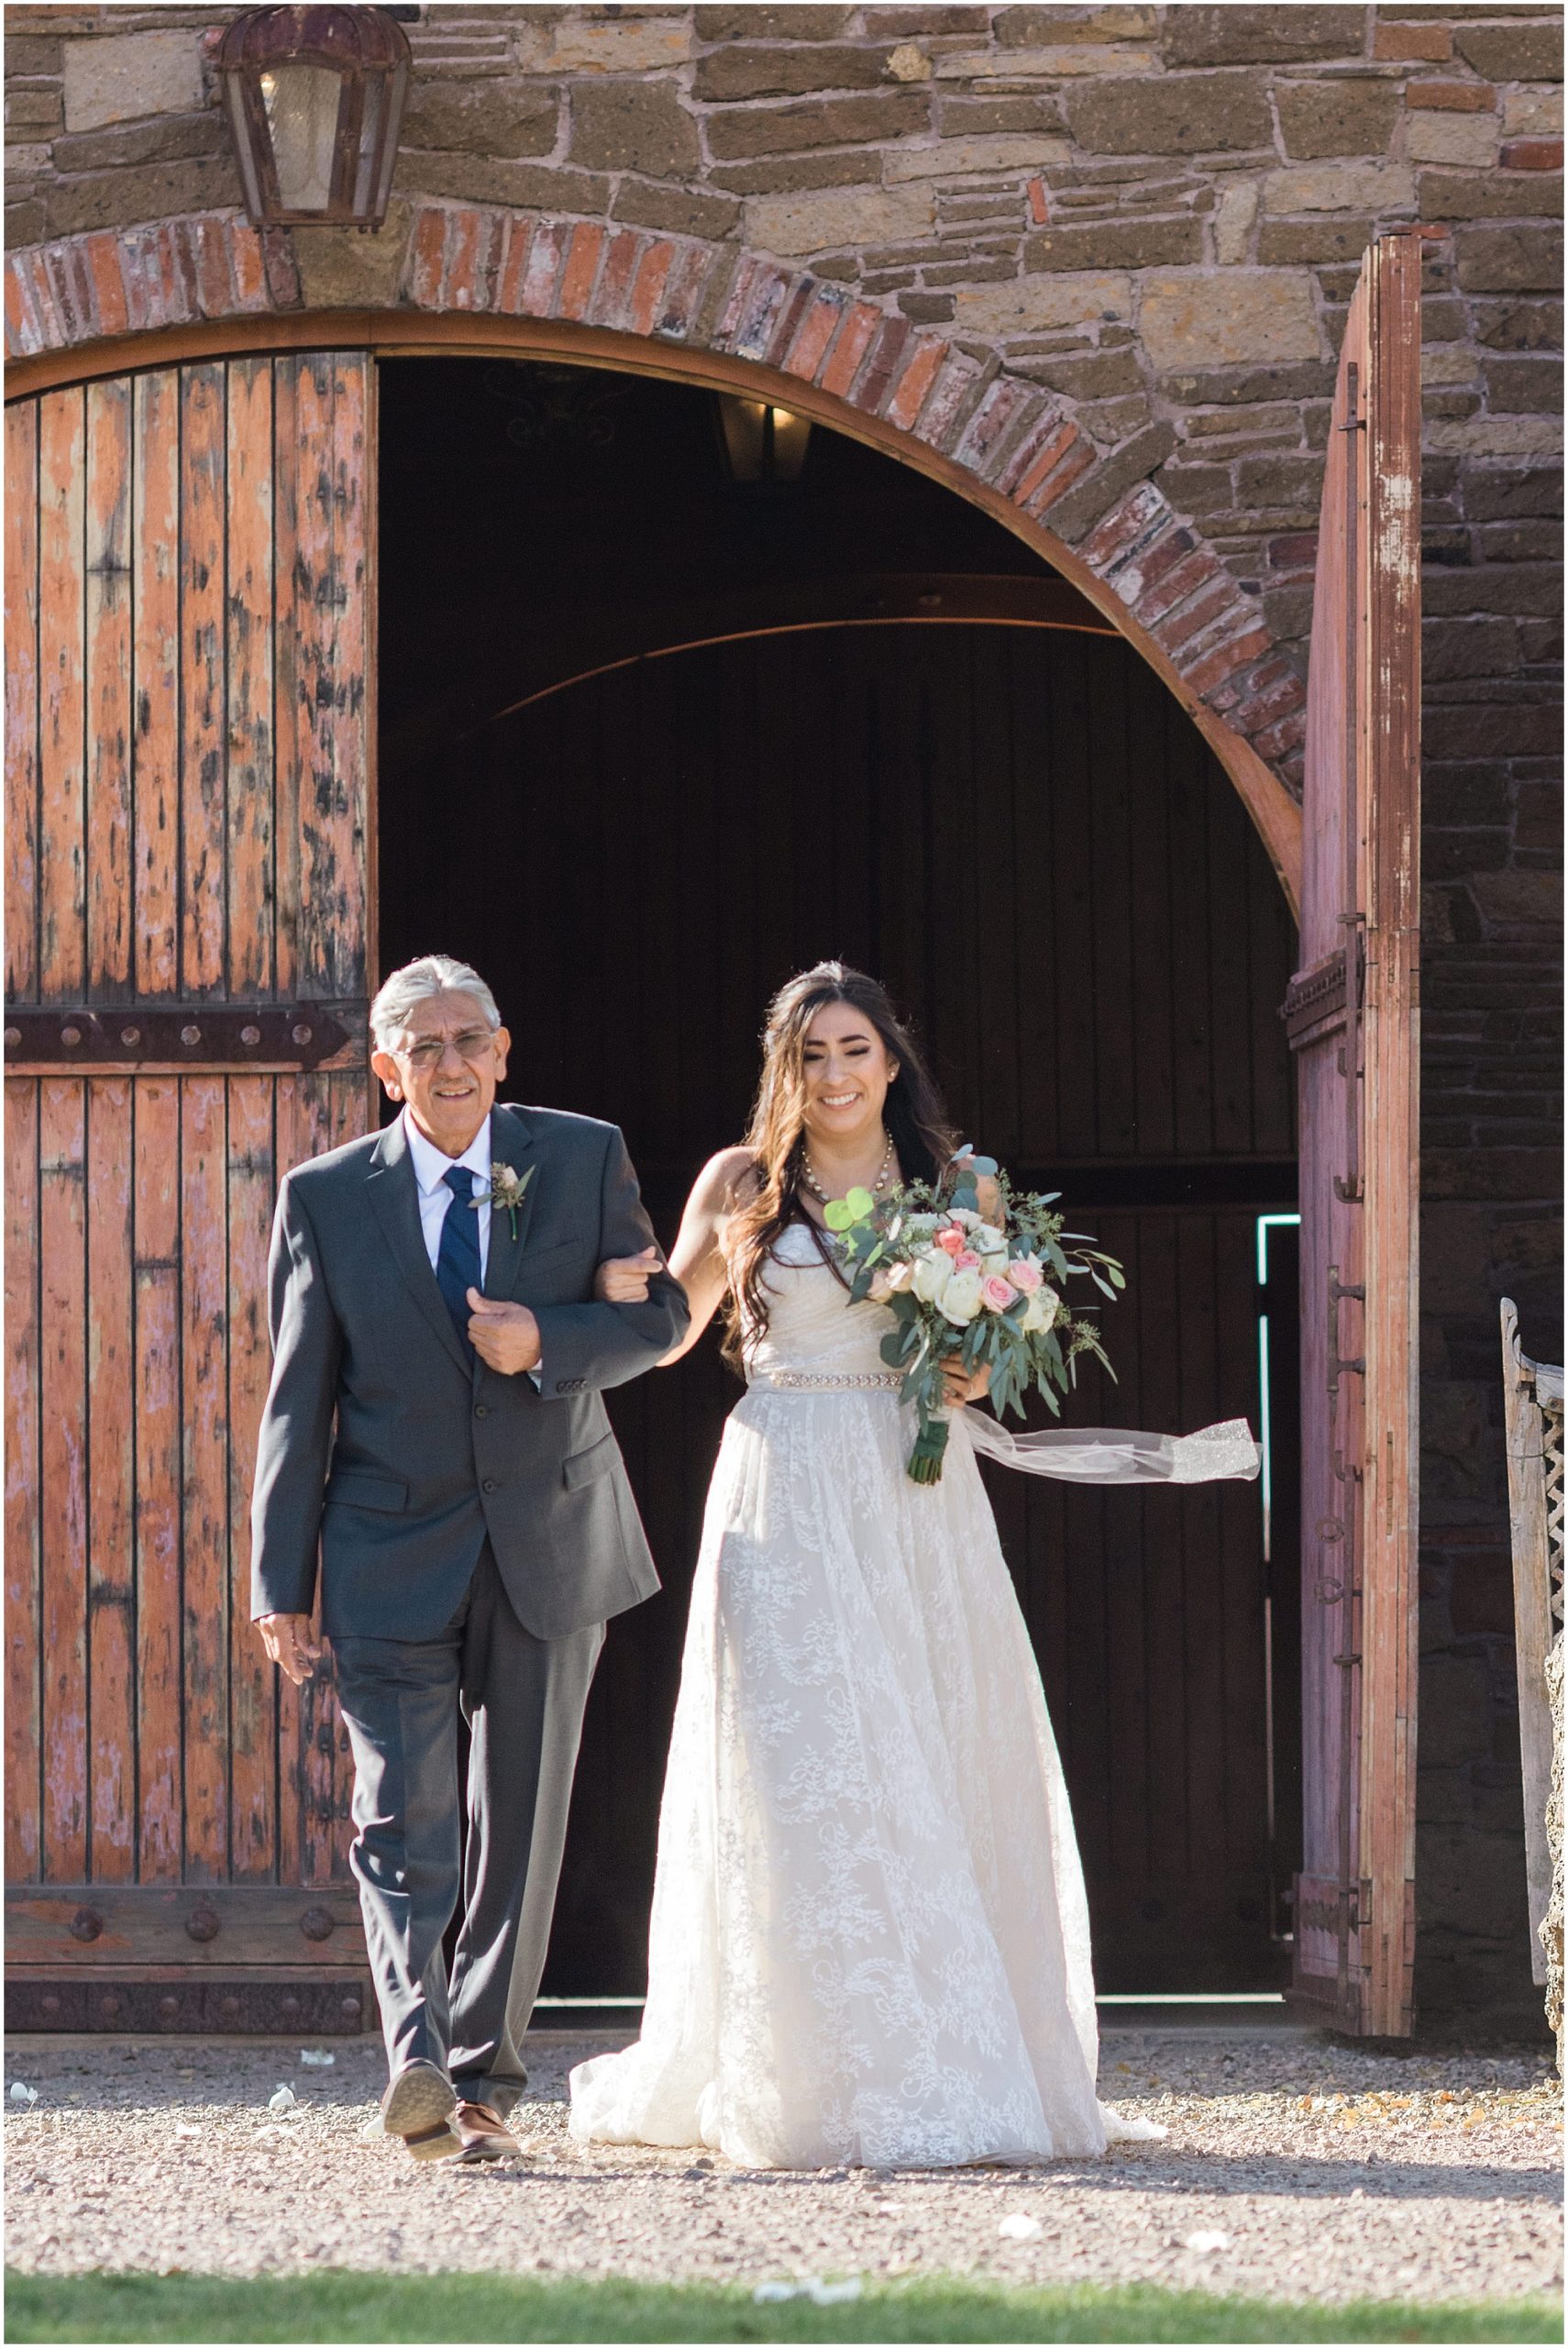 The bride and her father make their way out of the gorgeous barn wood doors at the Tuscan Stables wedding venue at Ranch at the Canyons in Terrebonne, OR. | Erica Swantek Photography